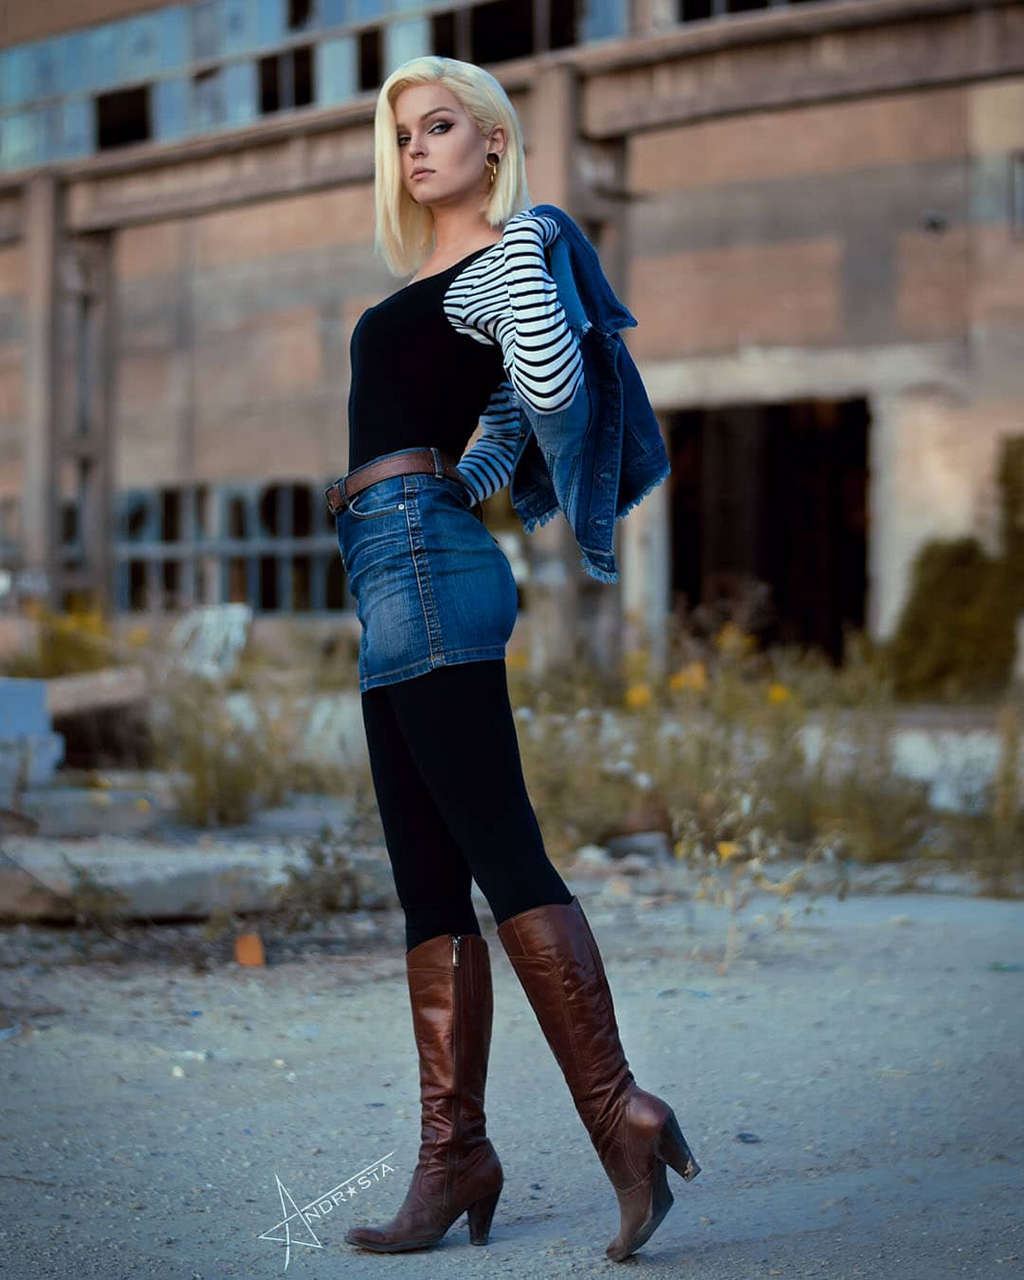 Andrasta As Android 18 0